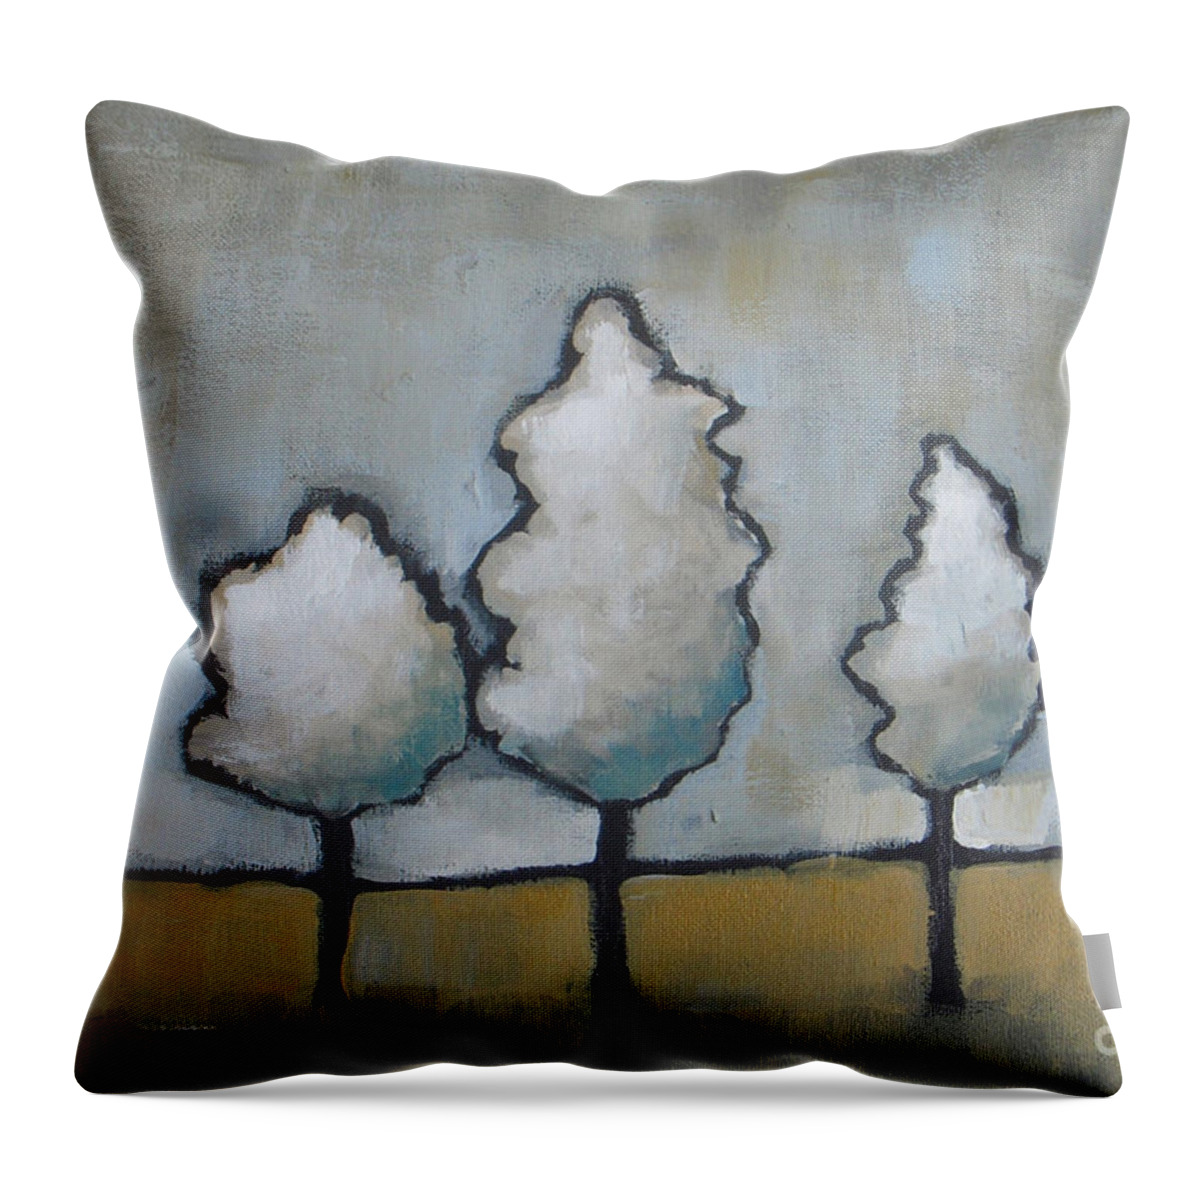 Landscape Throw Pillow featuring the painting White Trio by Vesna Antic